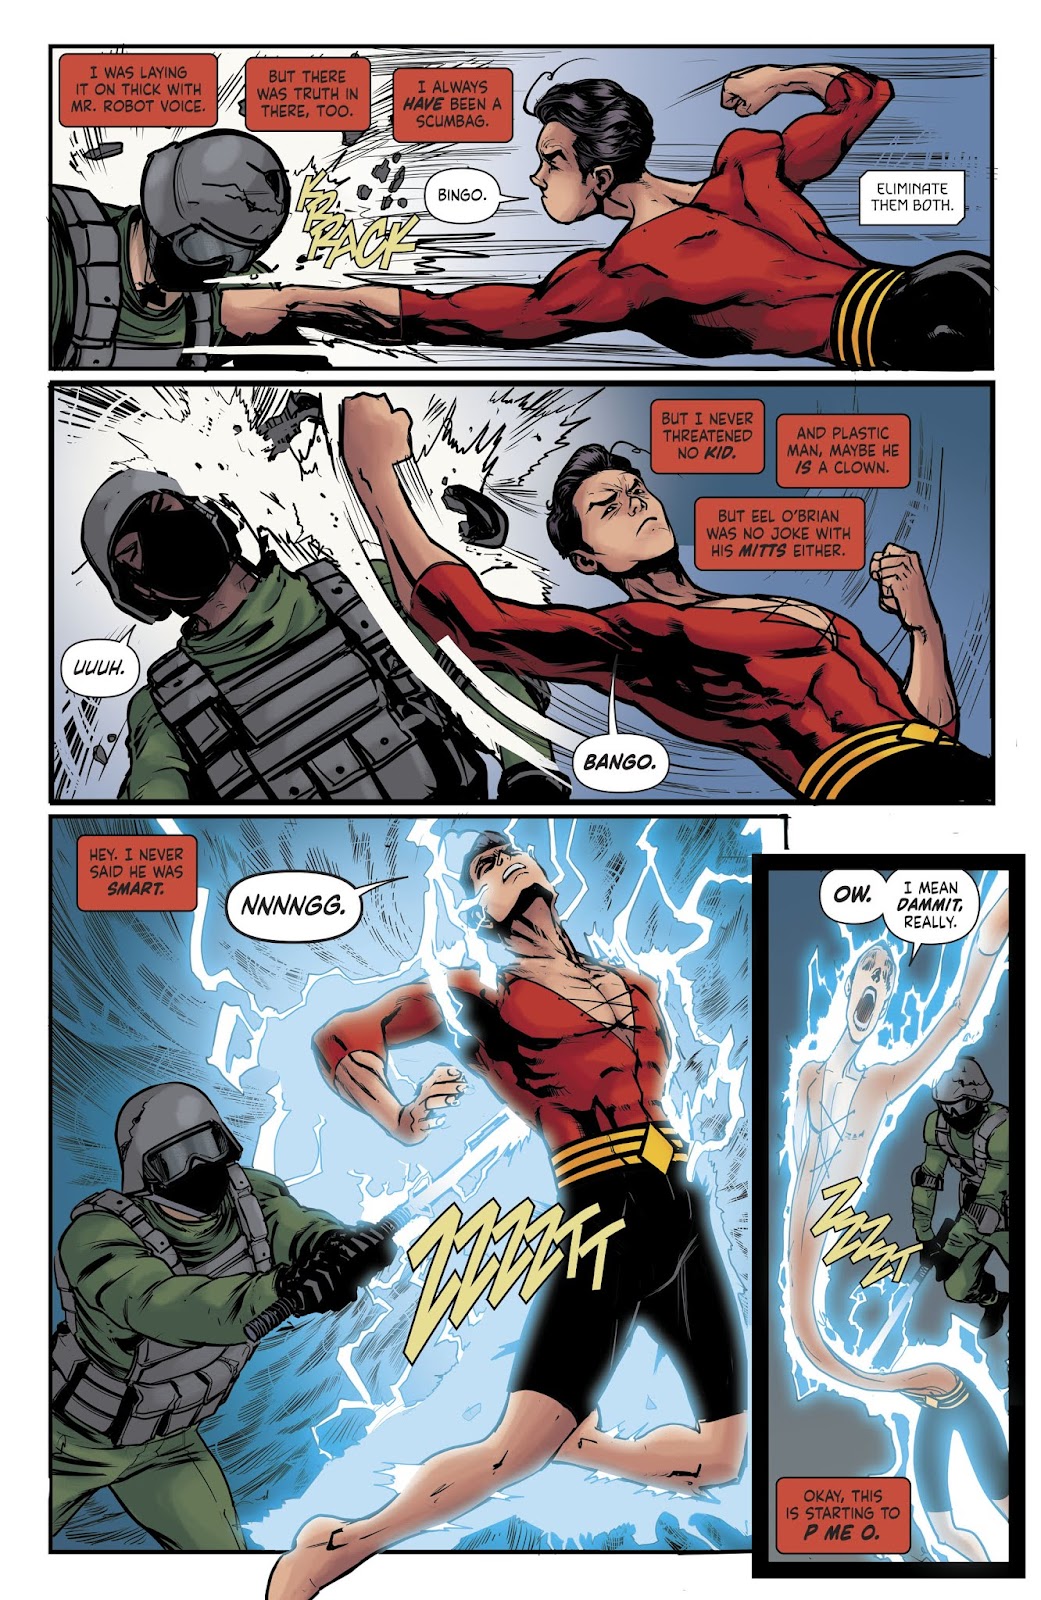 Plastic Man (2018) issue 3 - Page 10